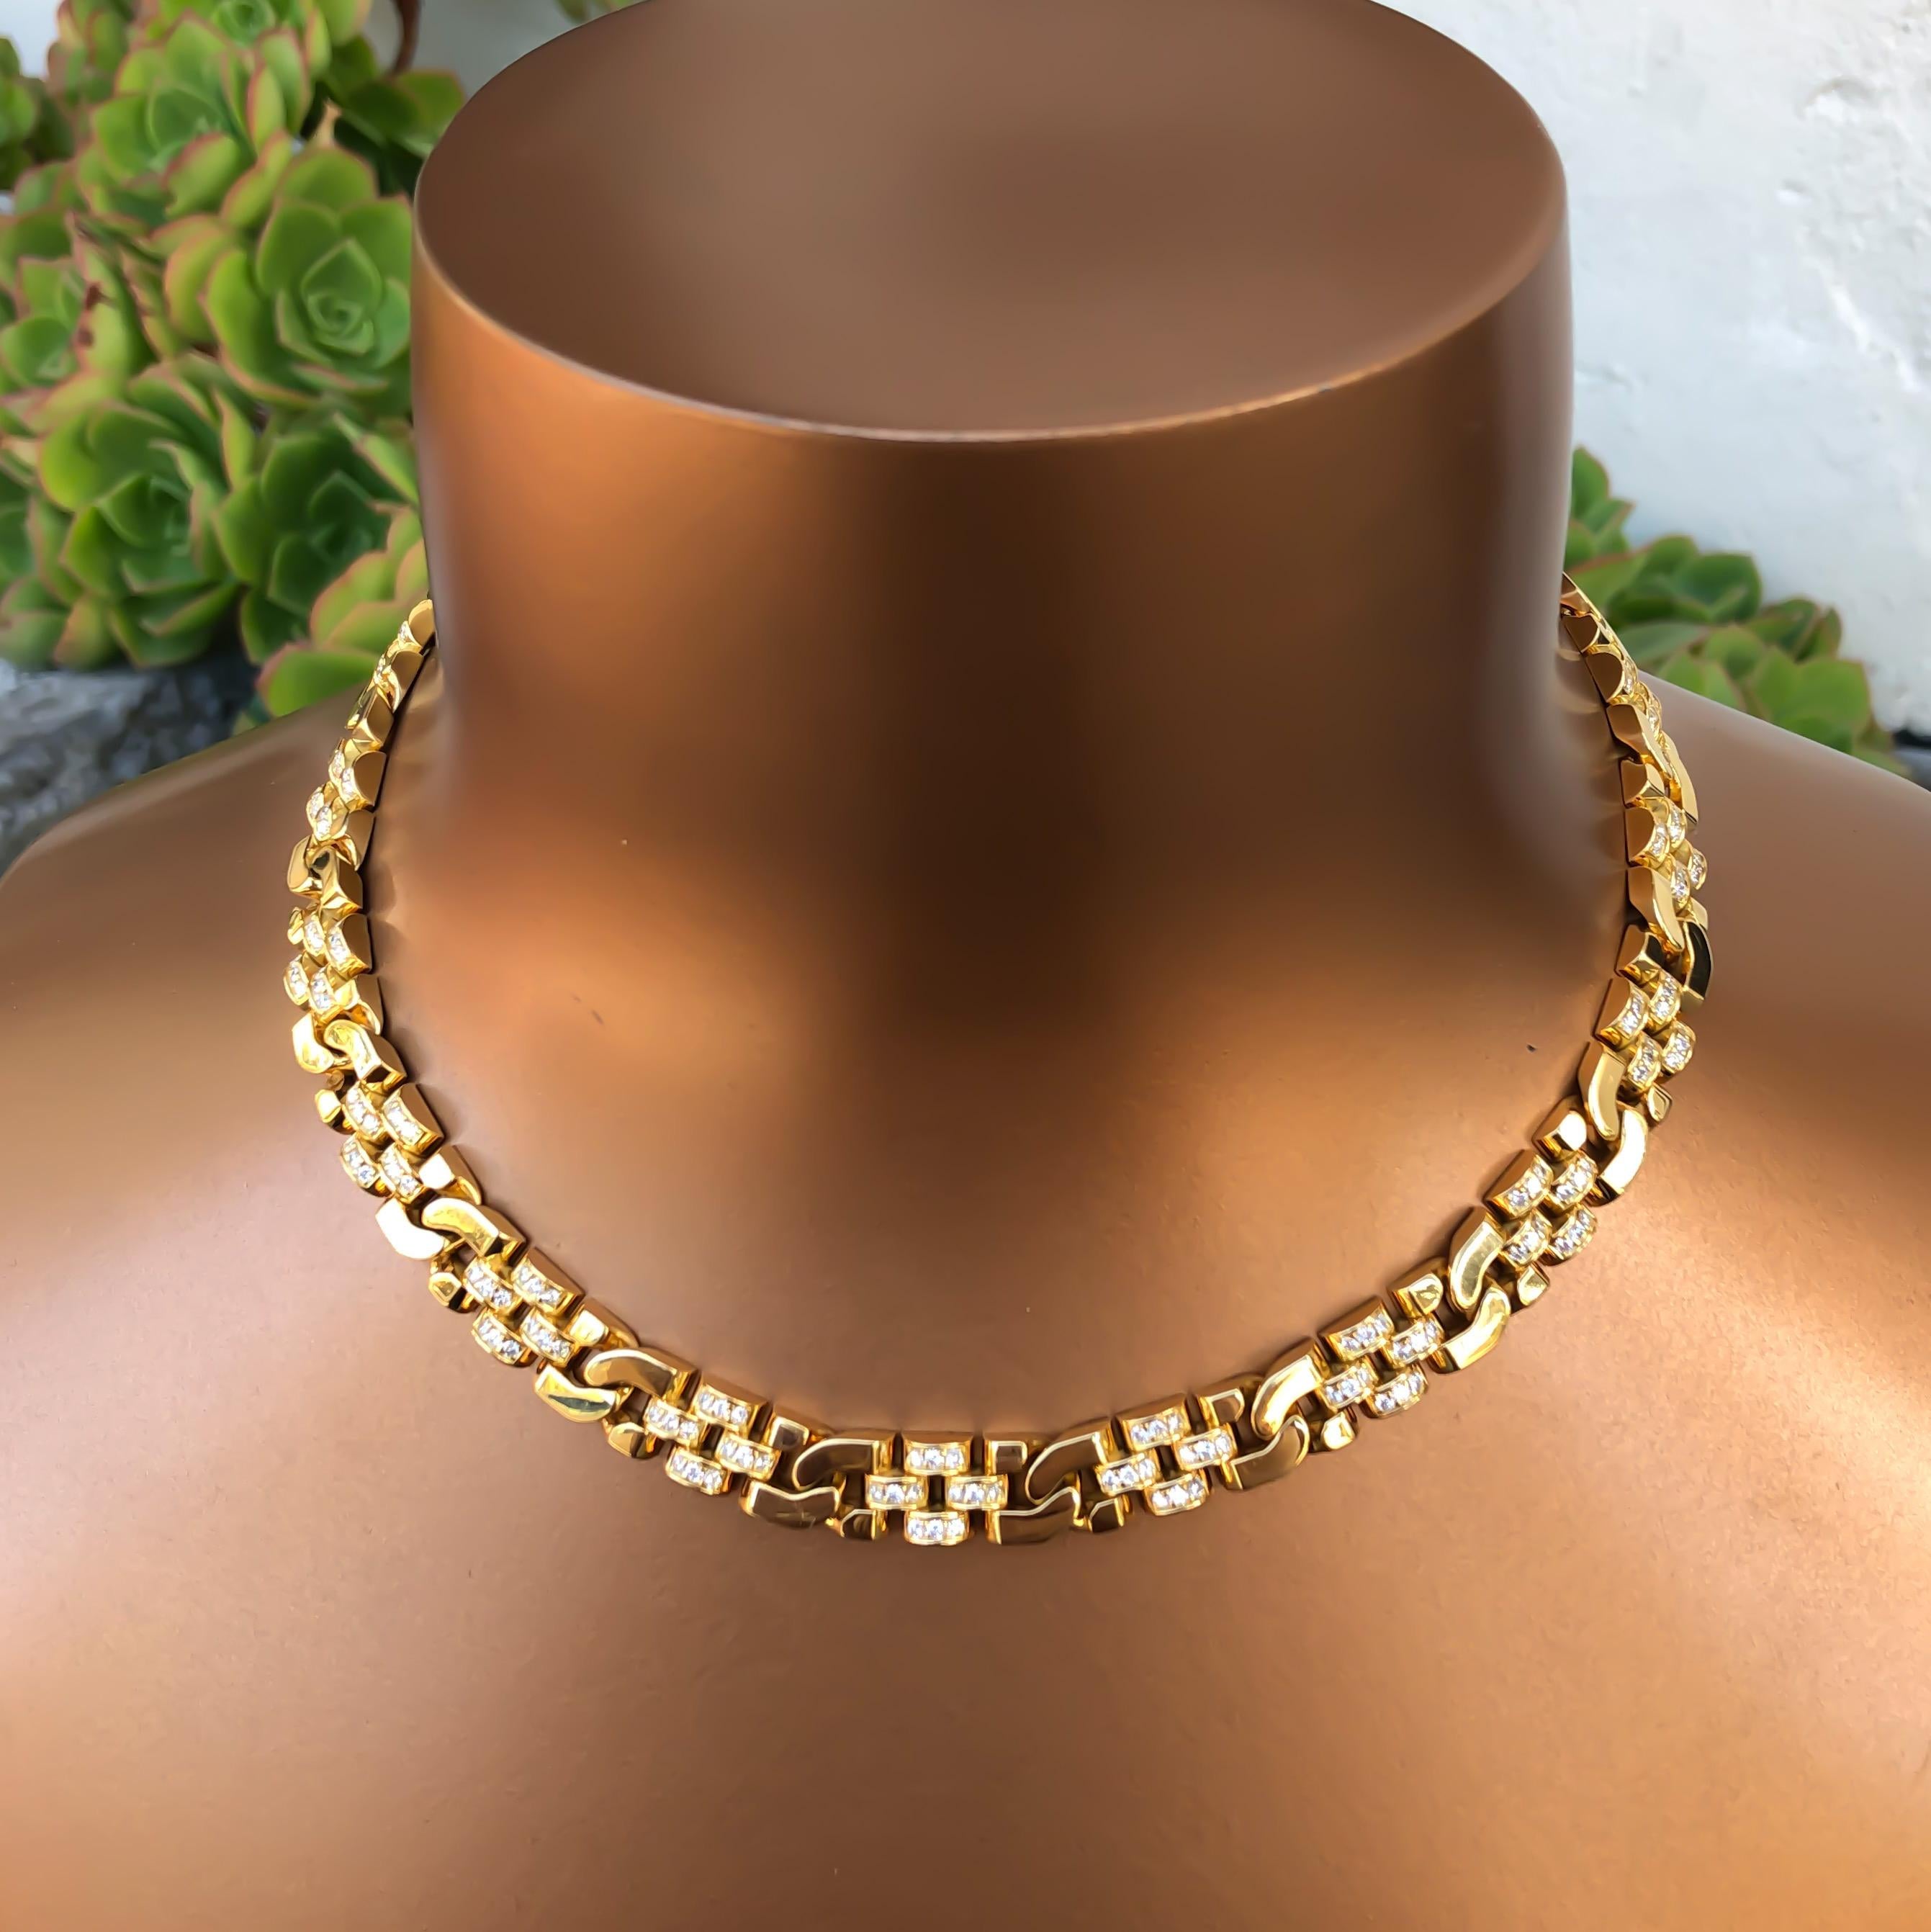 Important genuine Rolex lady's diamond collar necklace designed in solid 18 karat yellow gold. The necklace is a rare estate piece appraised for $24,800. It contains 240 premium round brilliant cut diamonds pave set in alternating polished links.